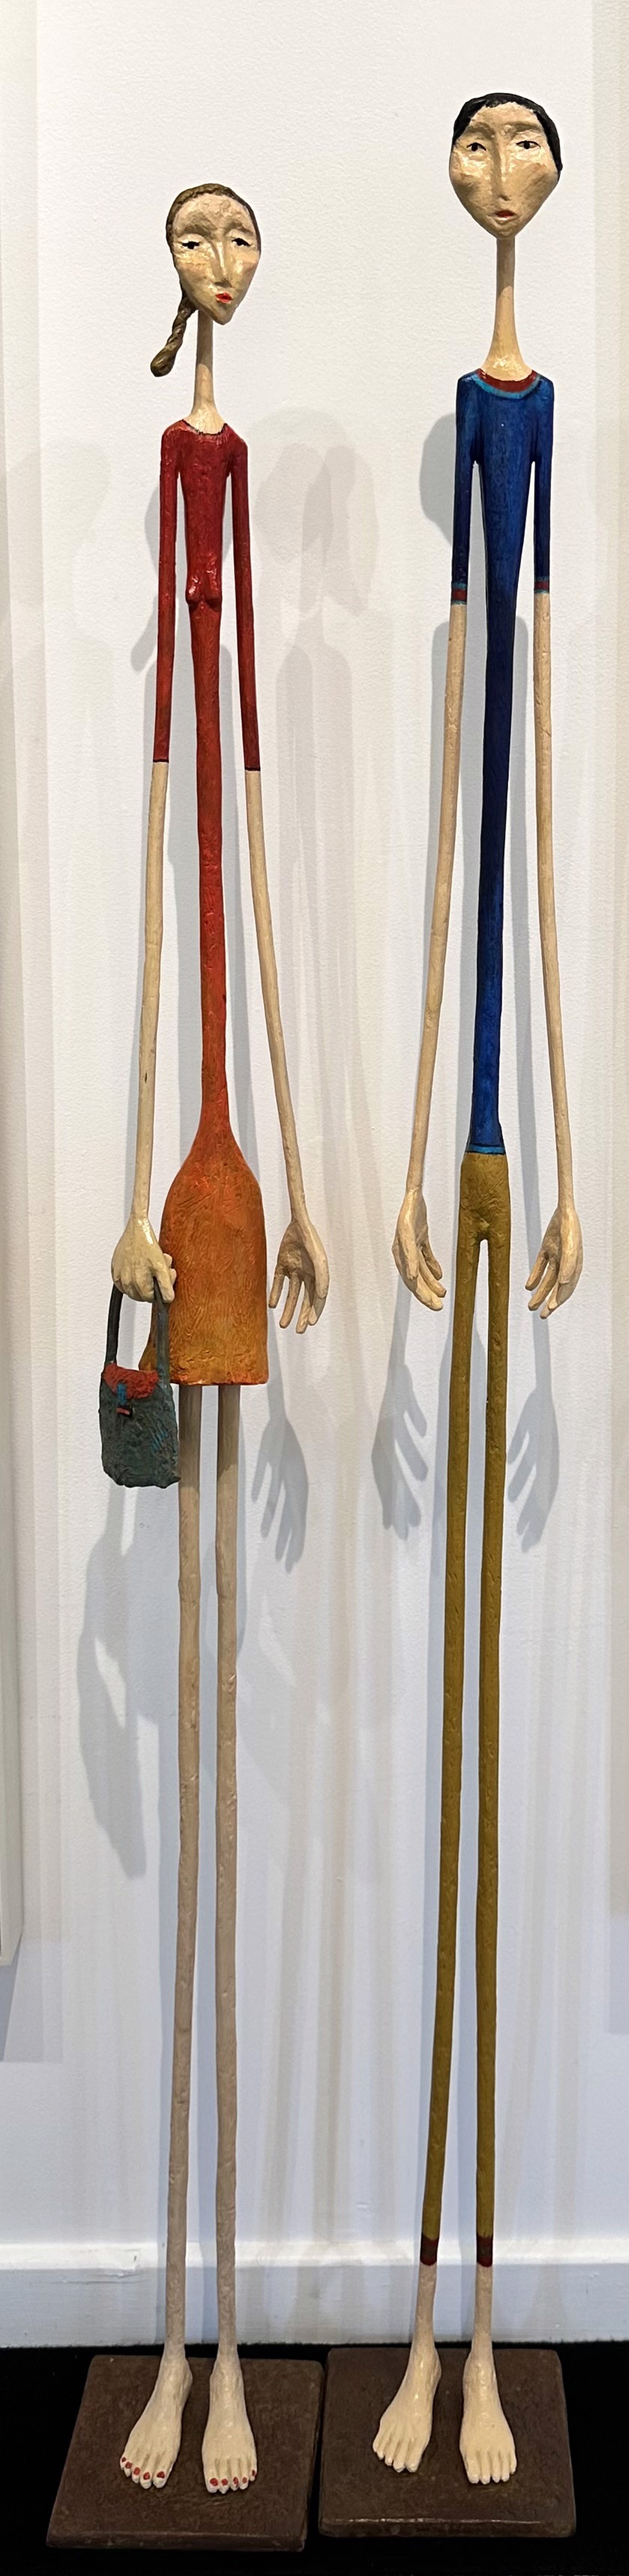 Long Fellow (Painted Couple) by Ruth Bloch